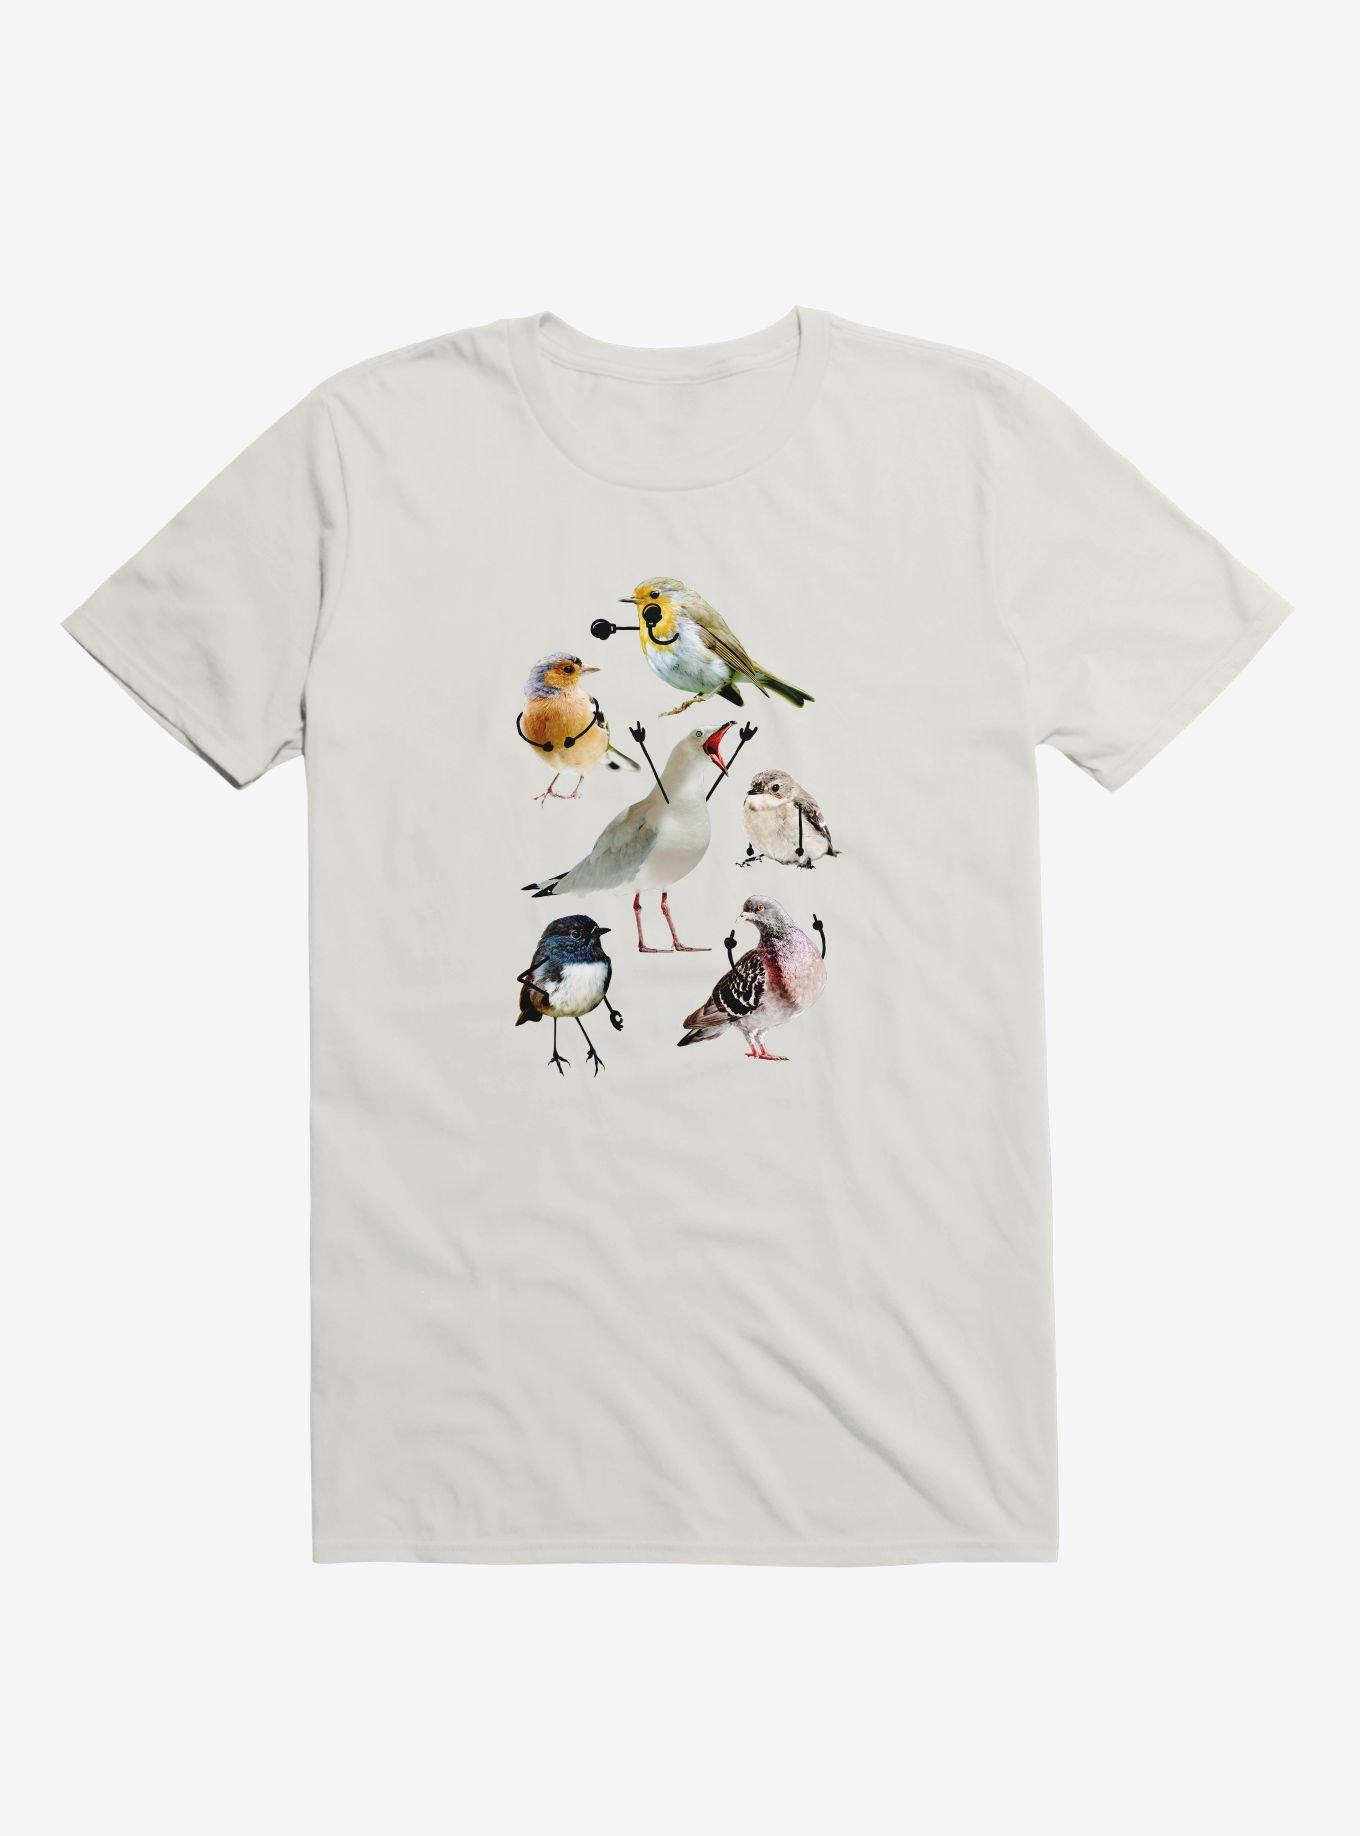 Birds With Arms T-Shirt, WHITE, hi-res